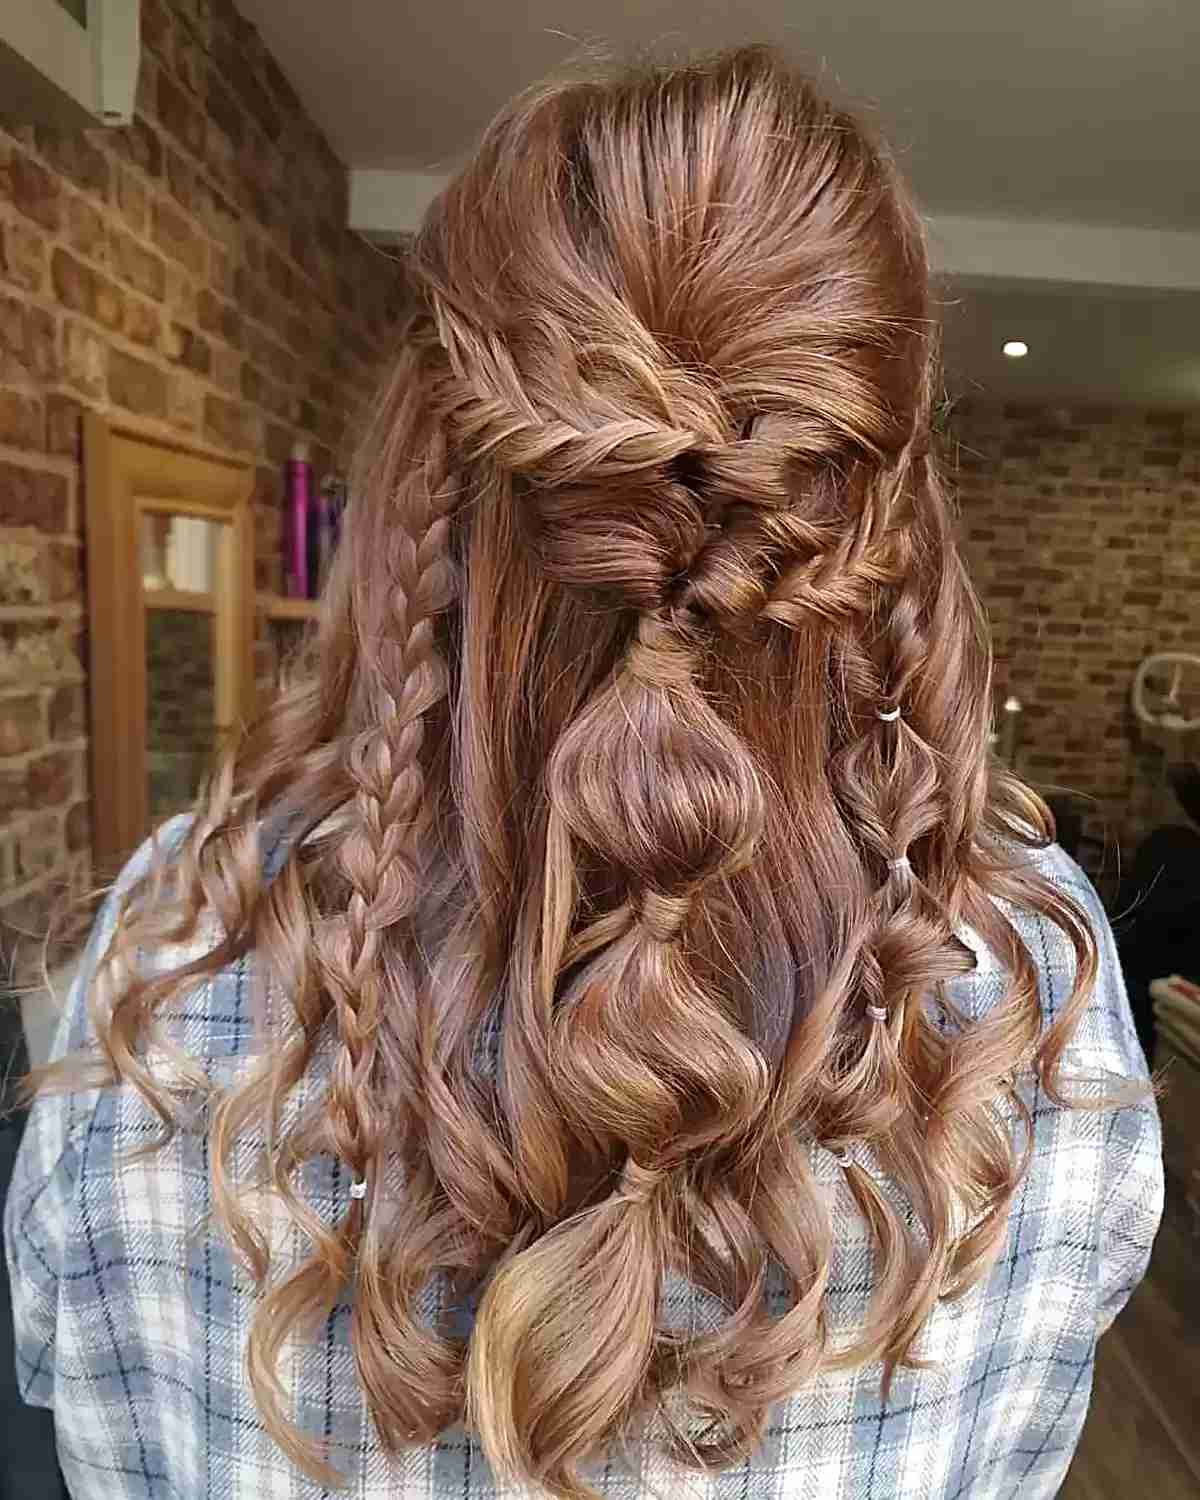 Mid Back-Length Half Festival Upstyle with Boho Braids and Twists